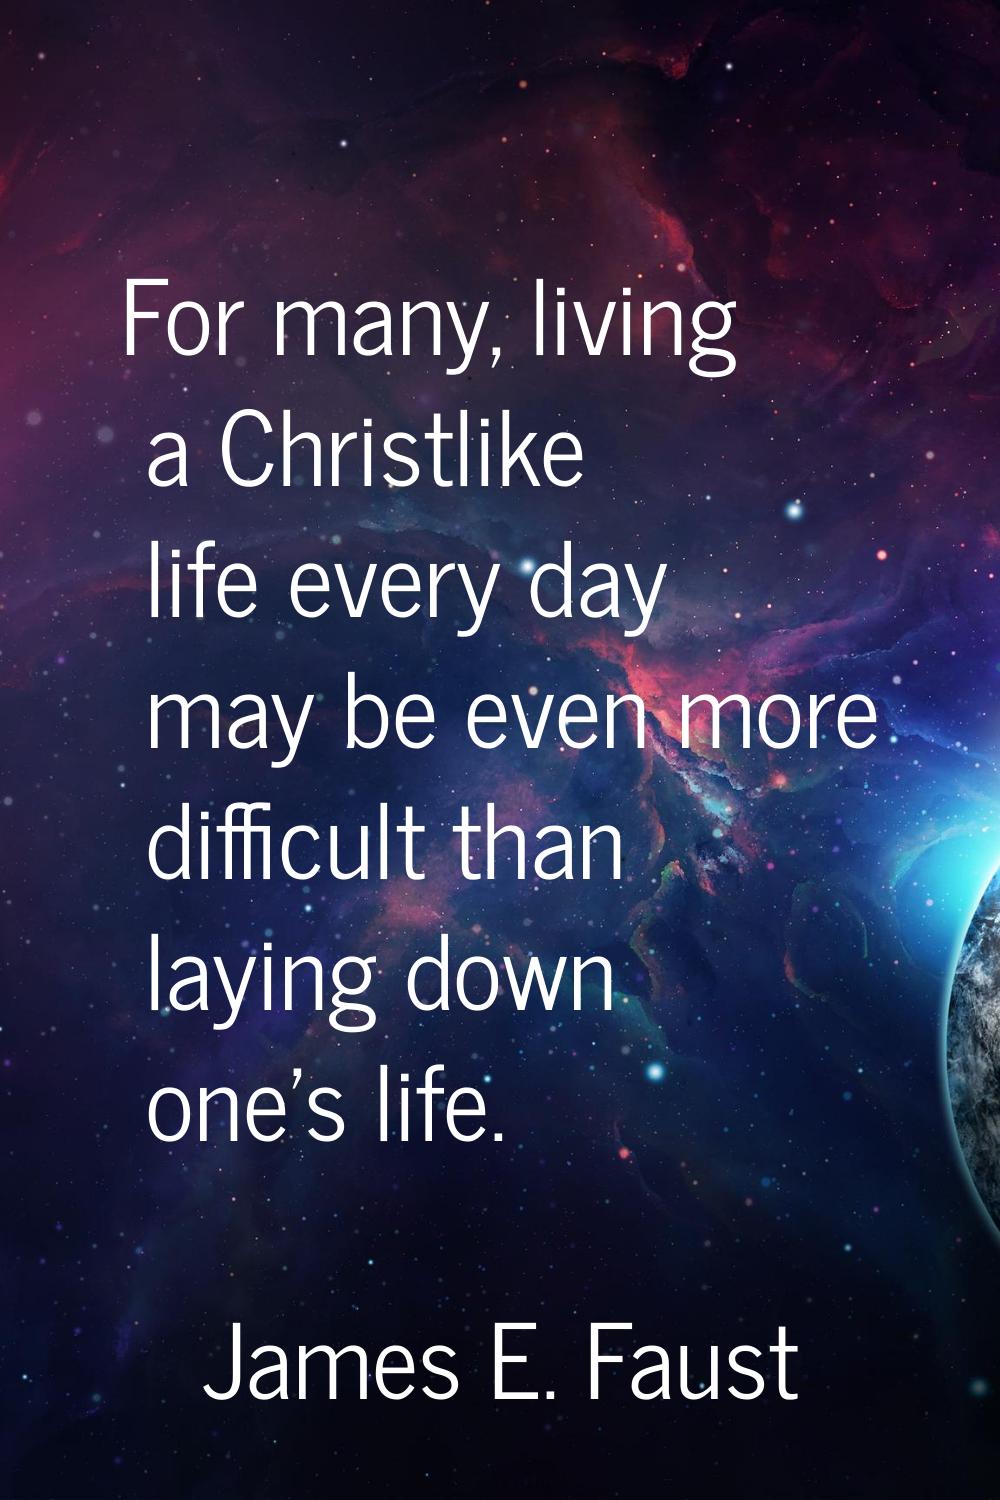 For many, living a Christlike life every day may be even more difficult than laying down one's life